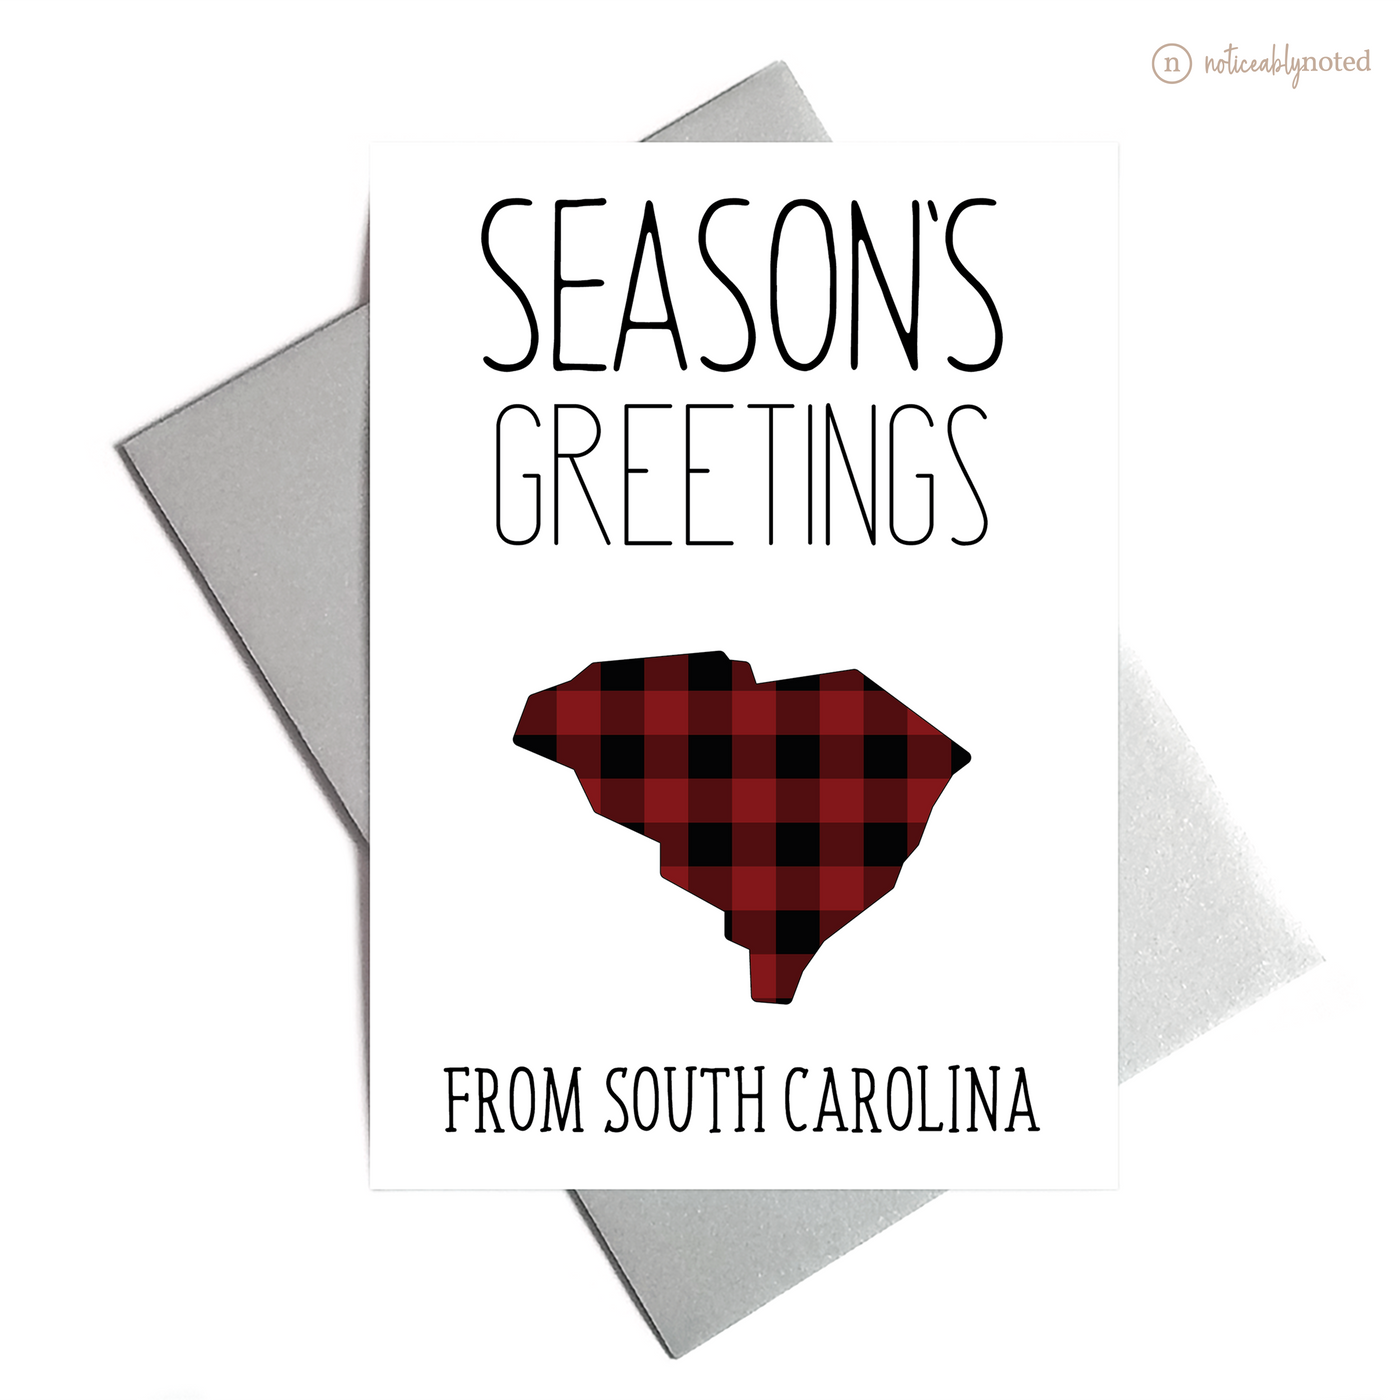 SC Holiday Greeting Cards | Noticeably Noted